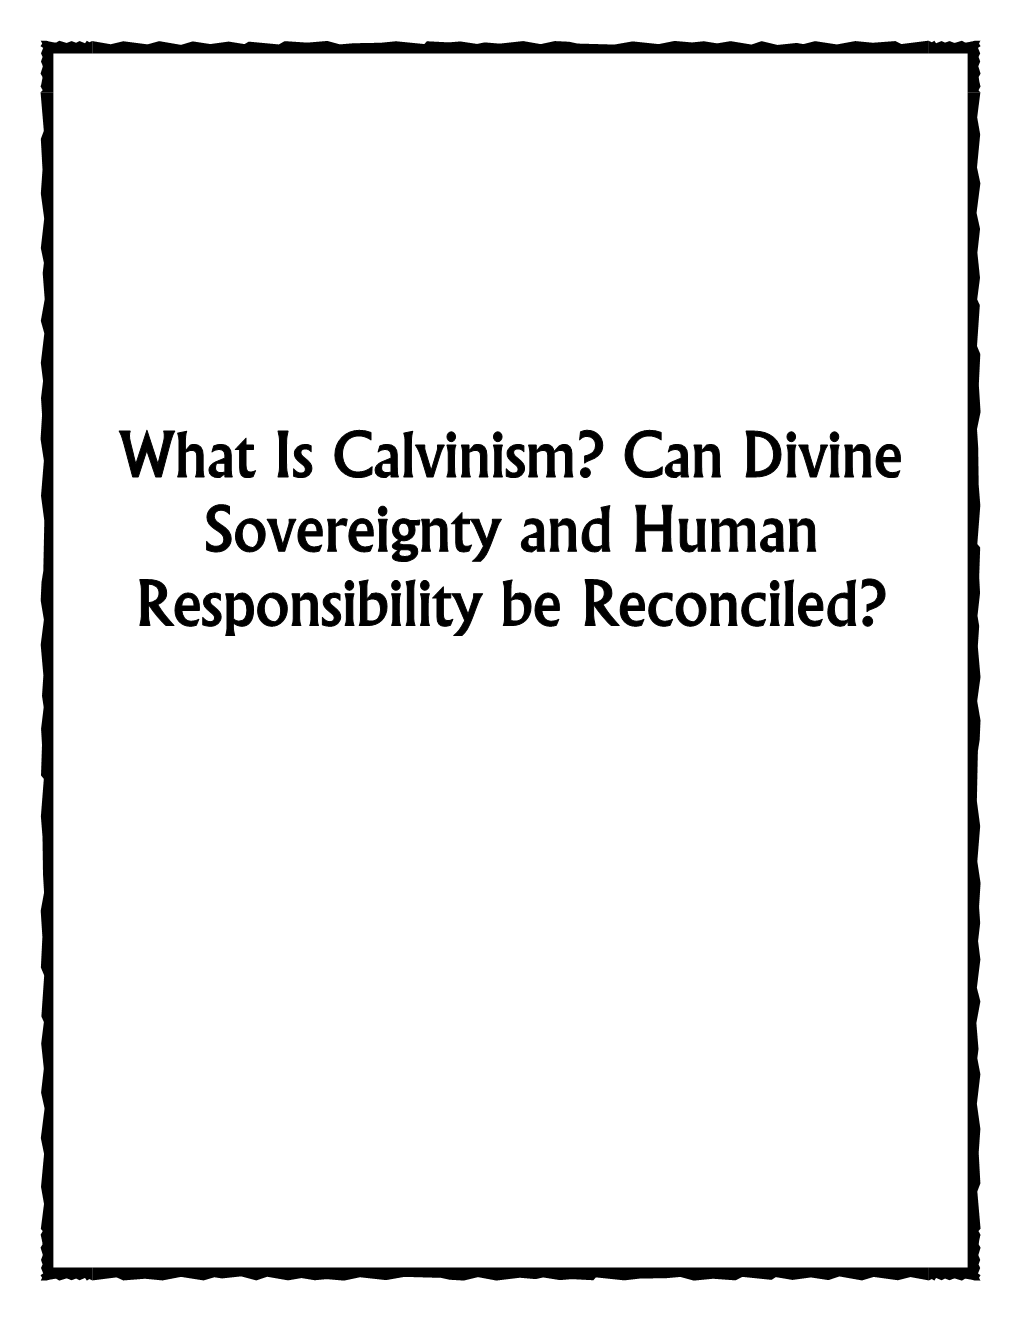 What Is Calvinism? Can Divine Sovereignty and Human Responsibility Be Reconciled?